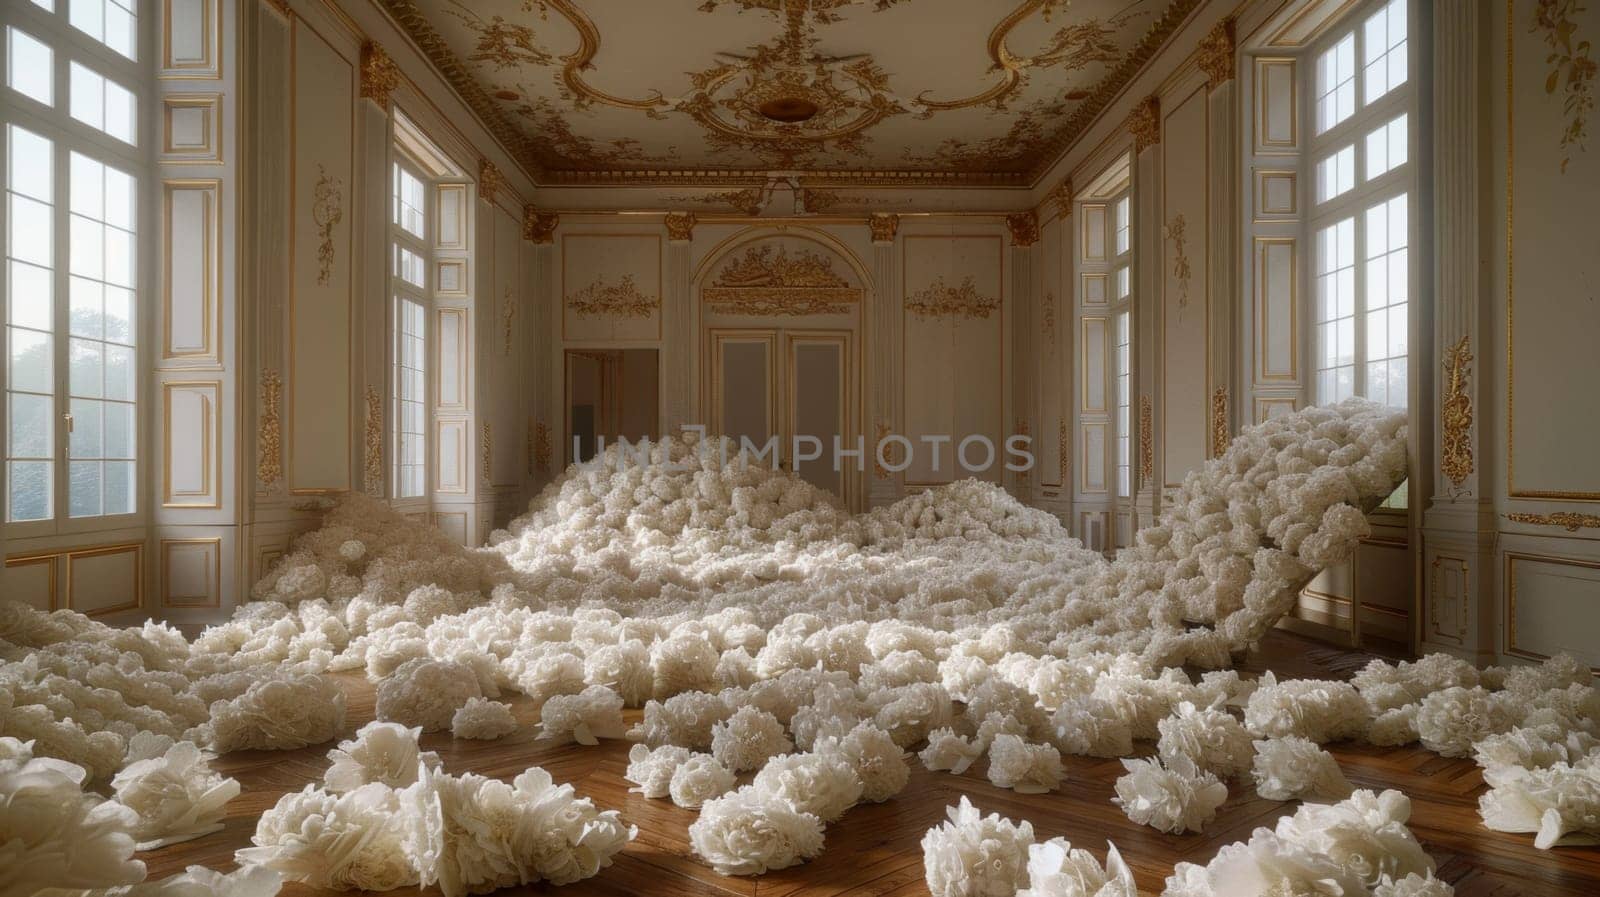 A grand room brimming with a sea of delicate white flowers, creating a serene and enchanting atmosphere.